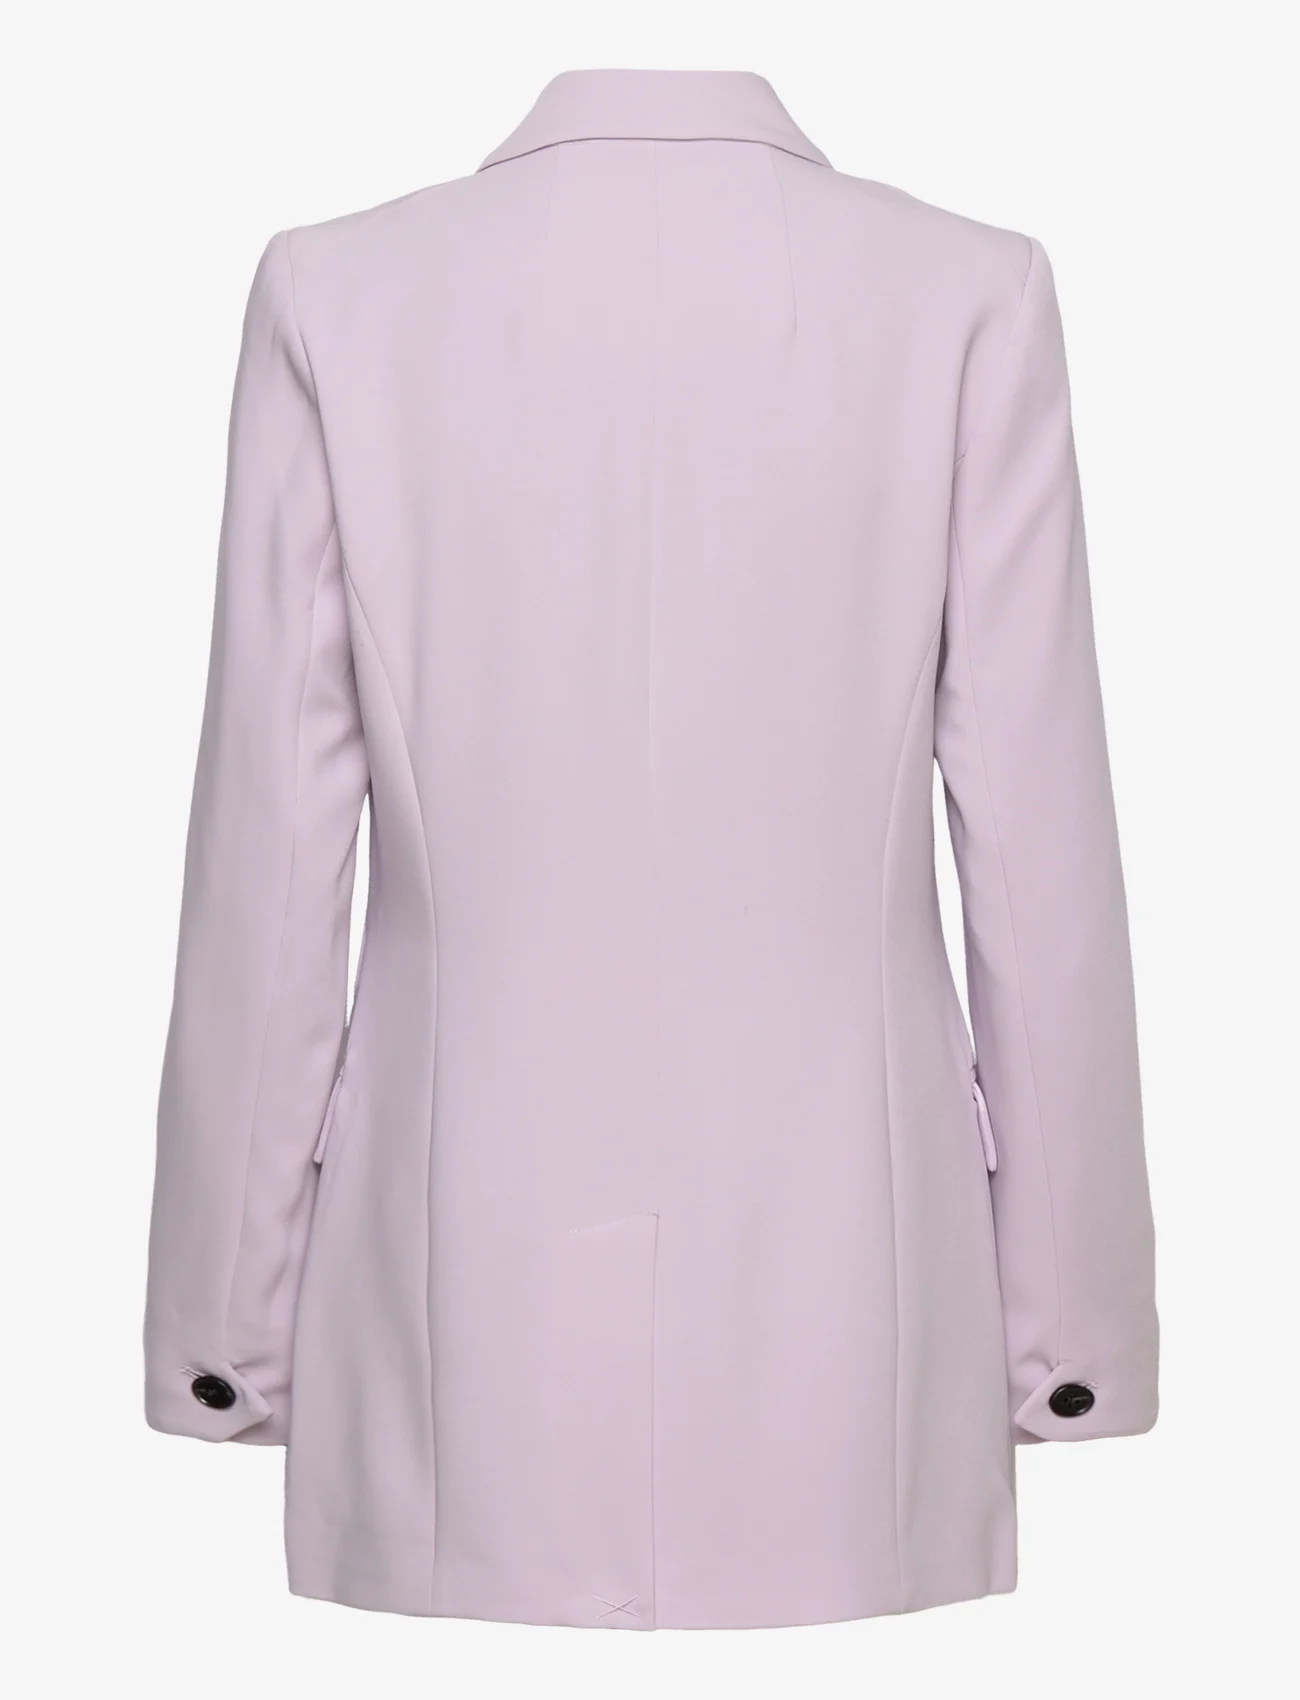 Bruuns Bazaar - BrassicaBBLinda blazer - party wear at outlet prices - light orchid - 1